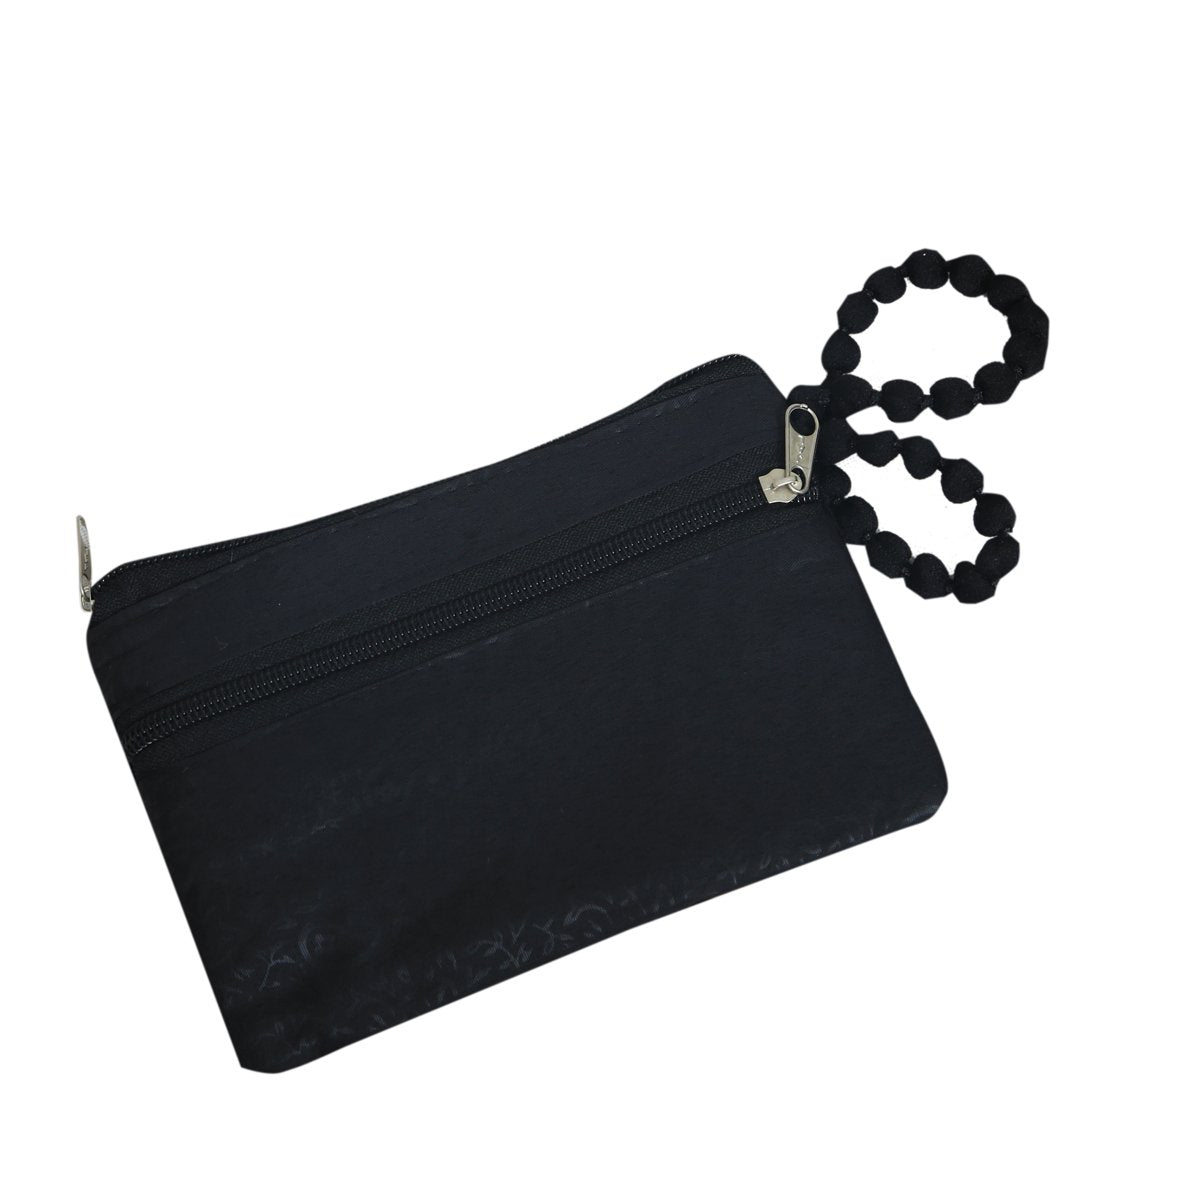 Stylish HBP Long Clasp Purse With Buckles For Women Ideal For Mobile Phone,  Cards And Wallet N2345 From Designerbags_shop, $49.75 | DHgate.Com